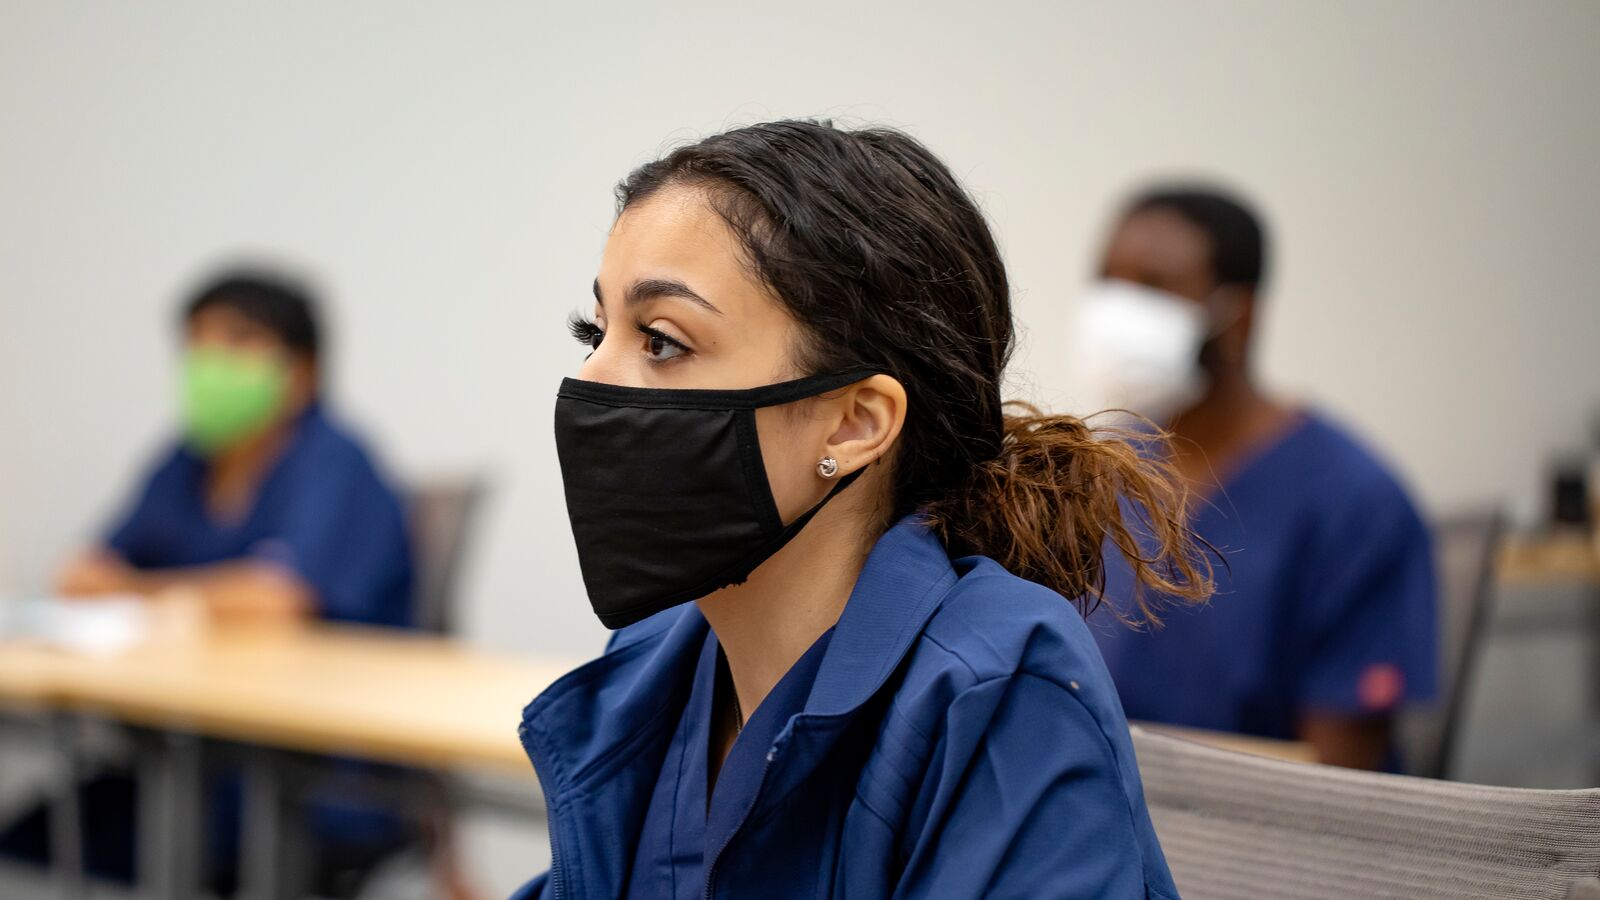 A student at the Central Texas Allied Health Institute attends class in a face mask